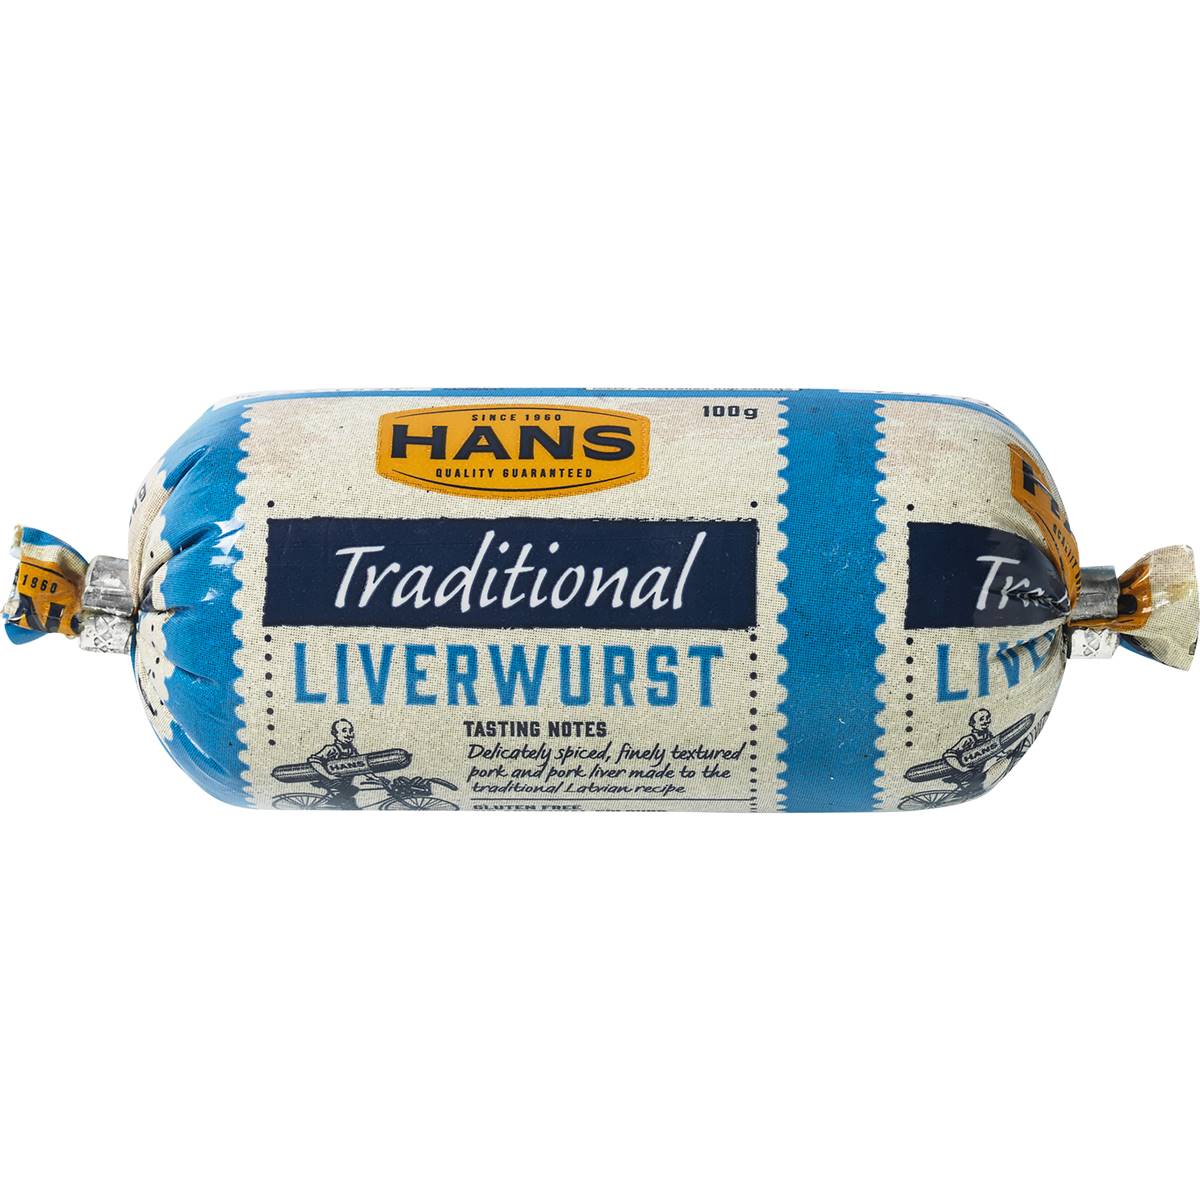 Calories in Hans Liverwurst Traditional